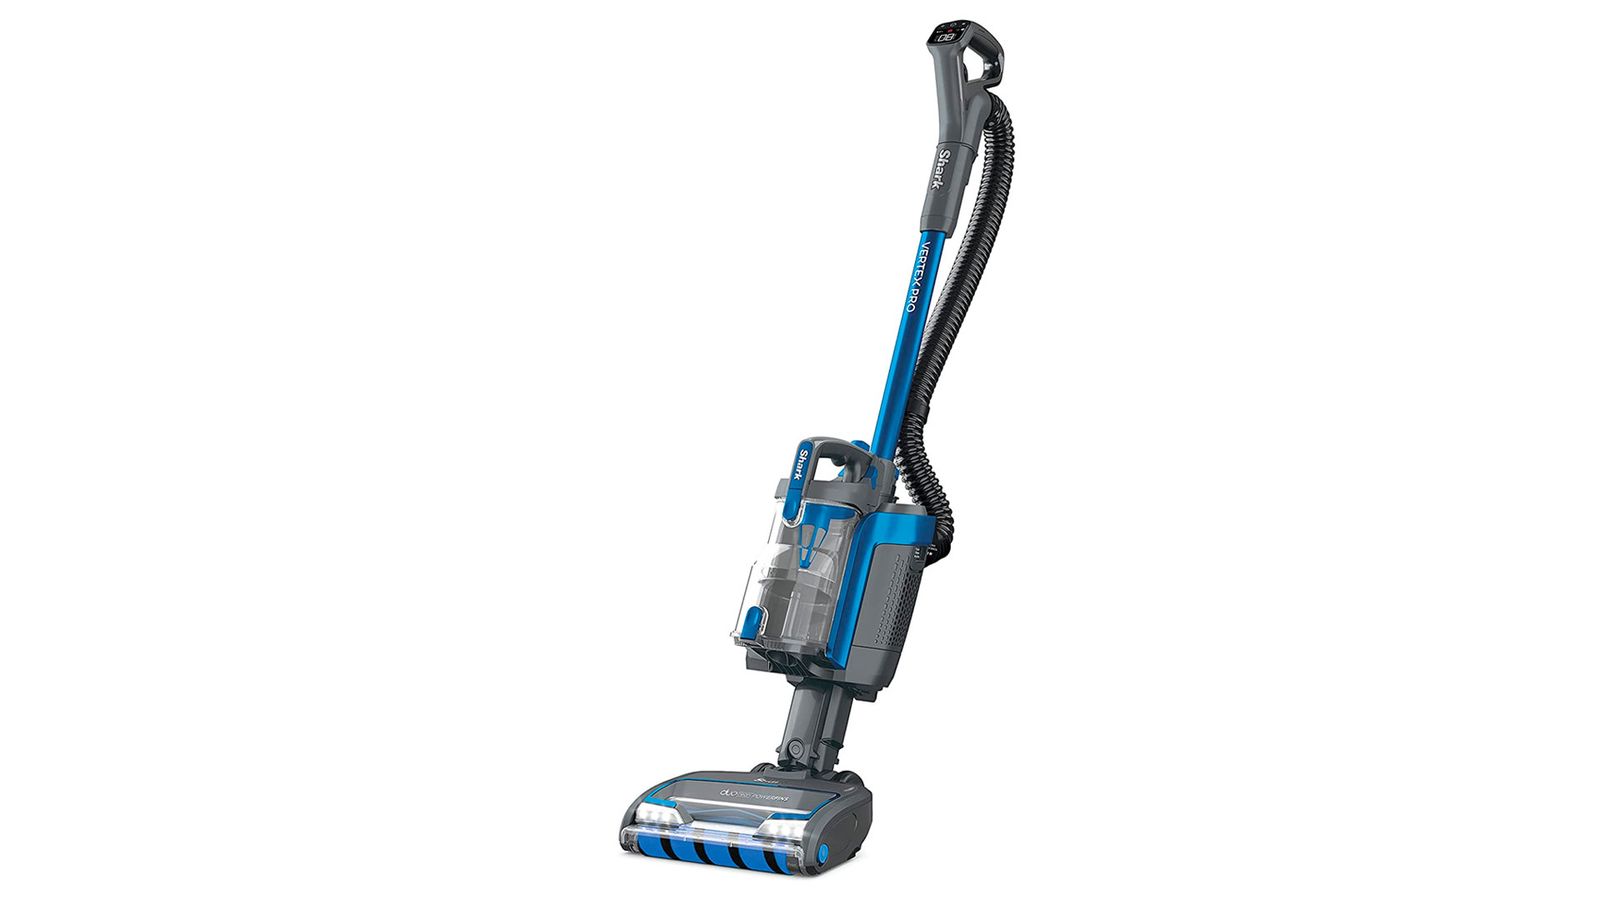 Shark Vertex Pro product image of a blue and grey upright vacuum.